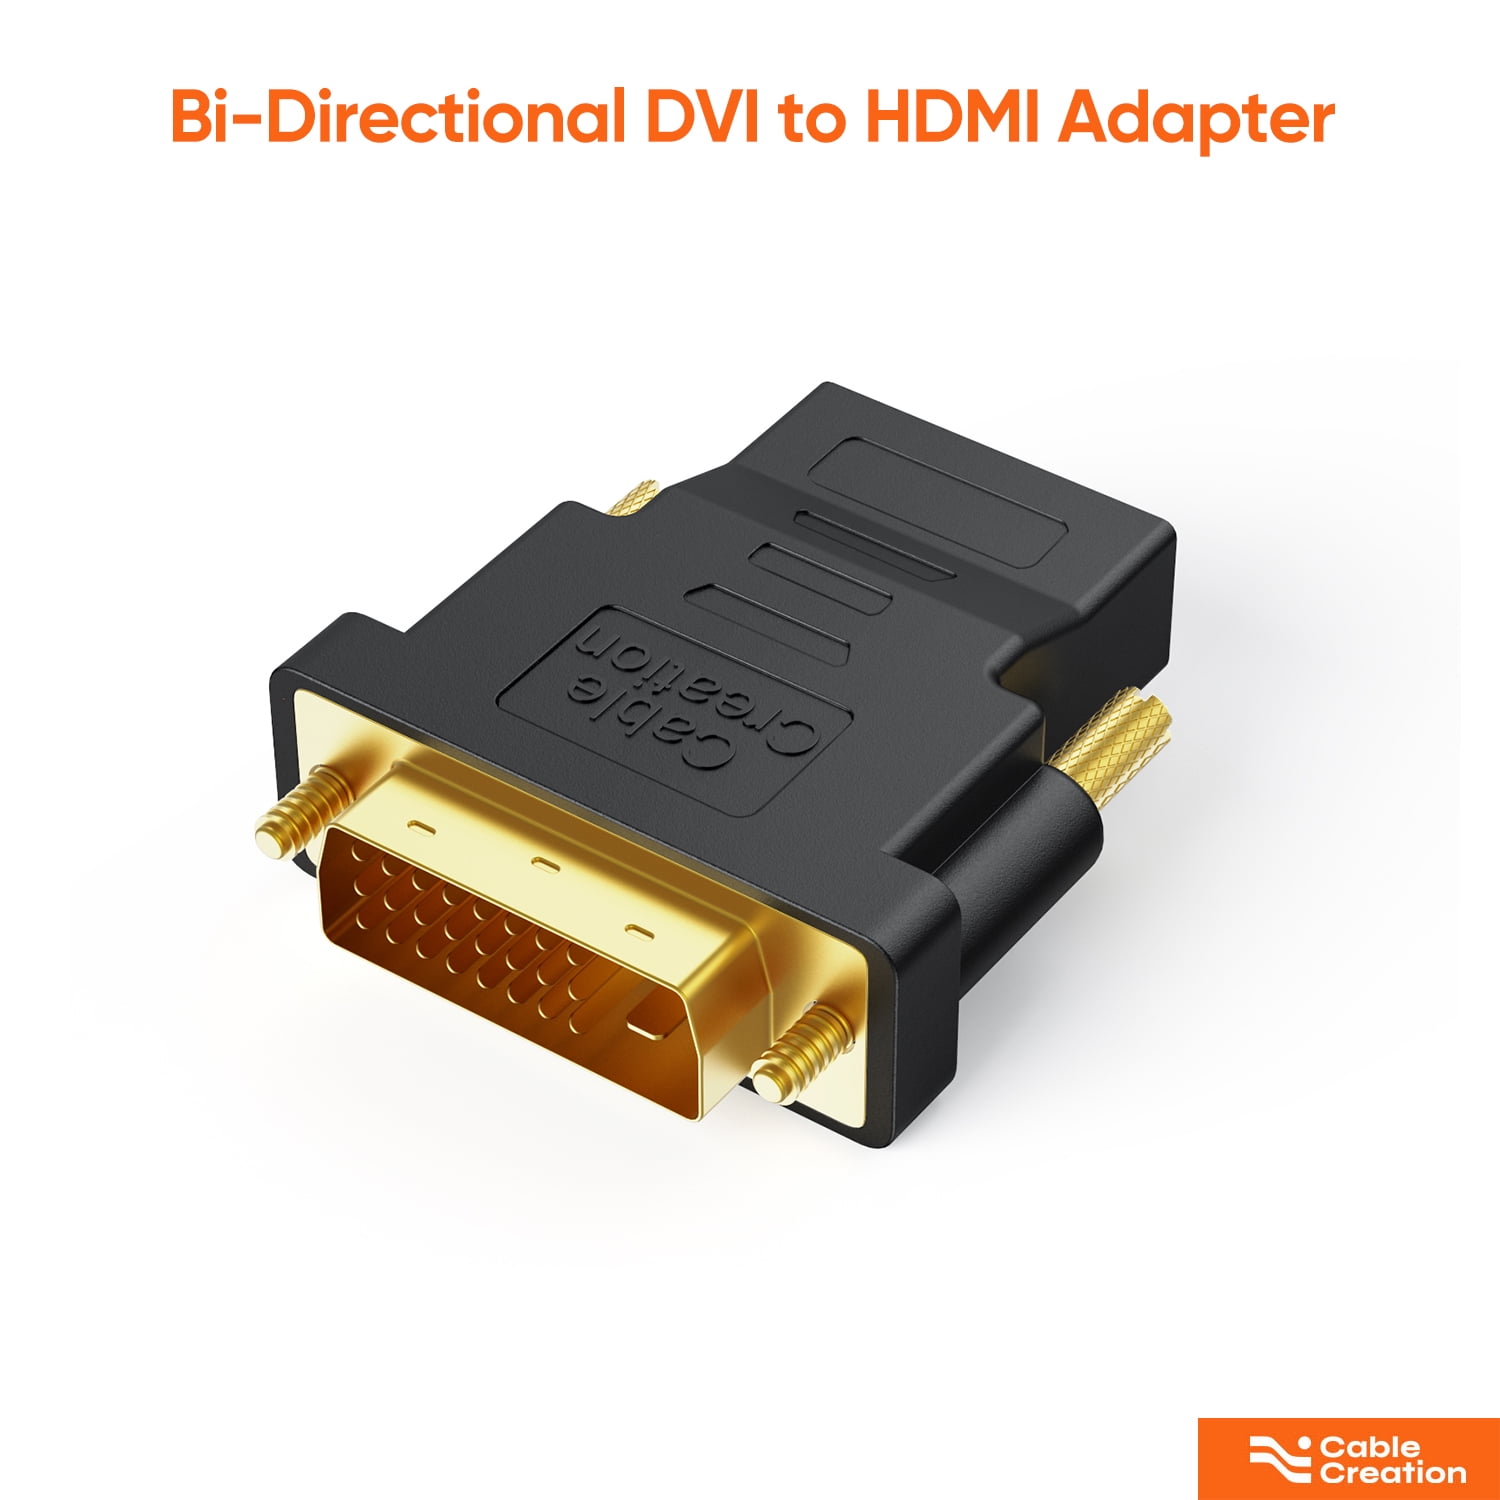 DVI to HDMI Adapter, Bi-Directional DVI Male to HDMI Female Support 1080P, 3D for Box,Blu-ray,Projector,HDTV - Walmart.com